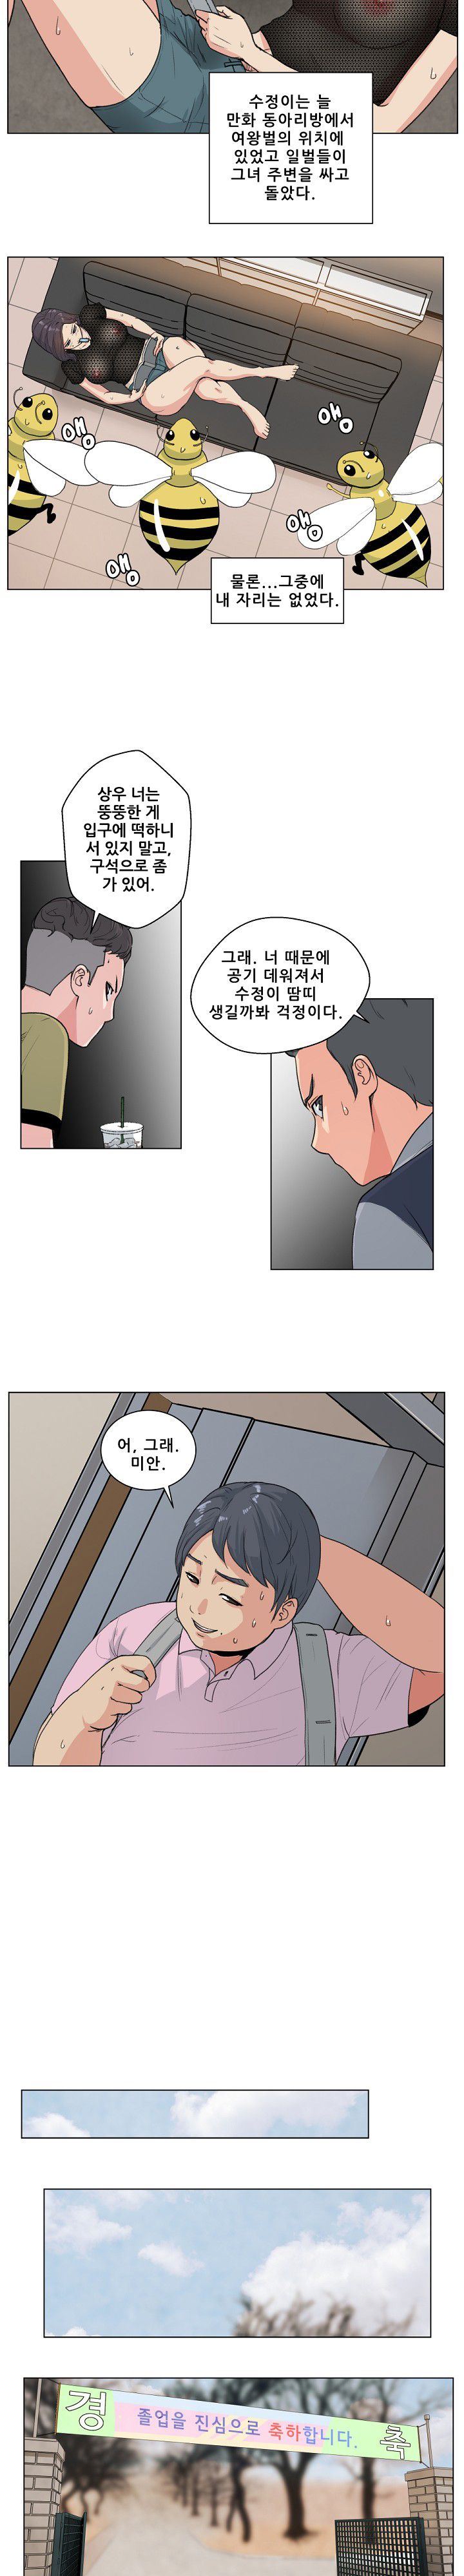 Sooyung Comic Shop Raw - Chapter 1 Page 5